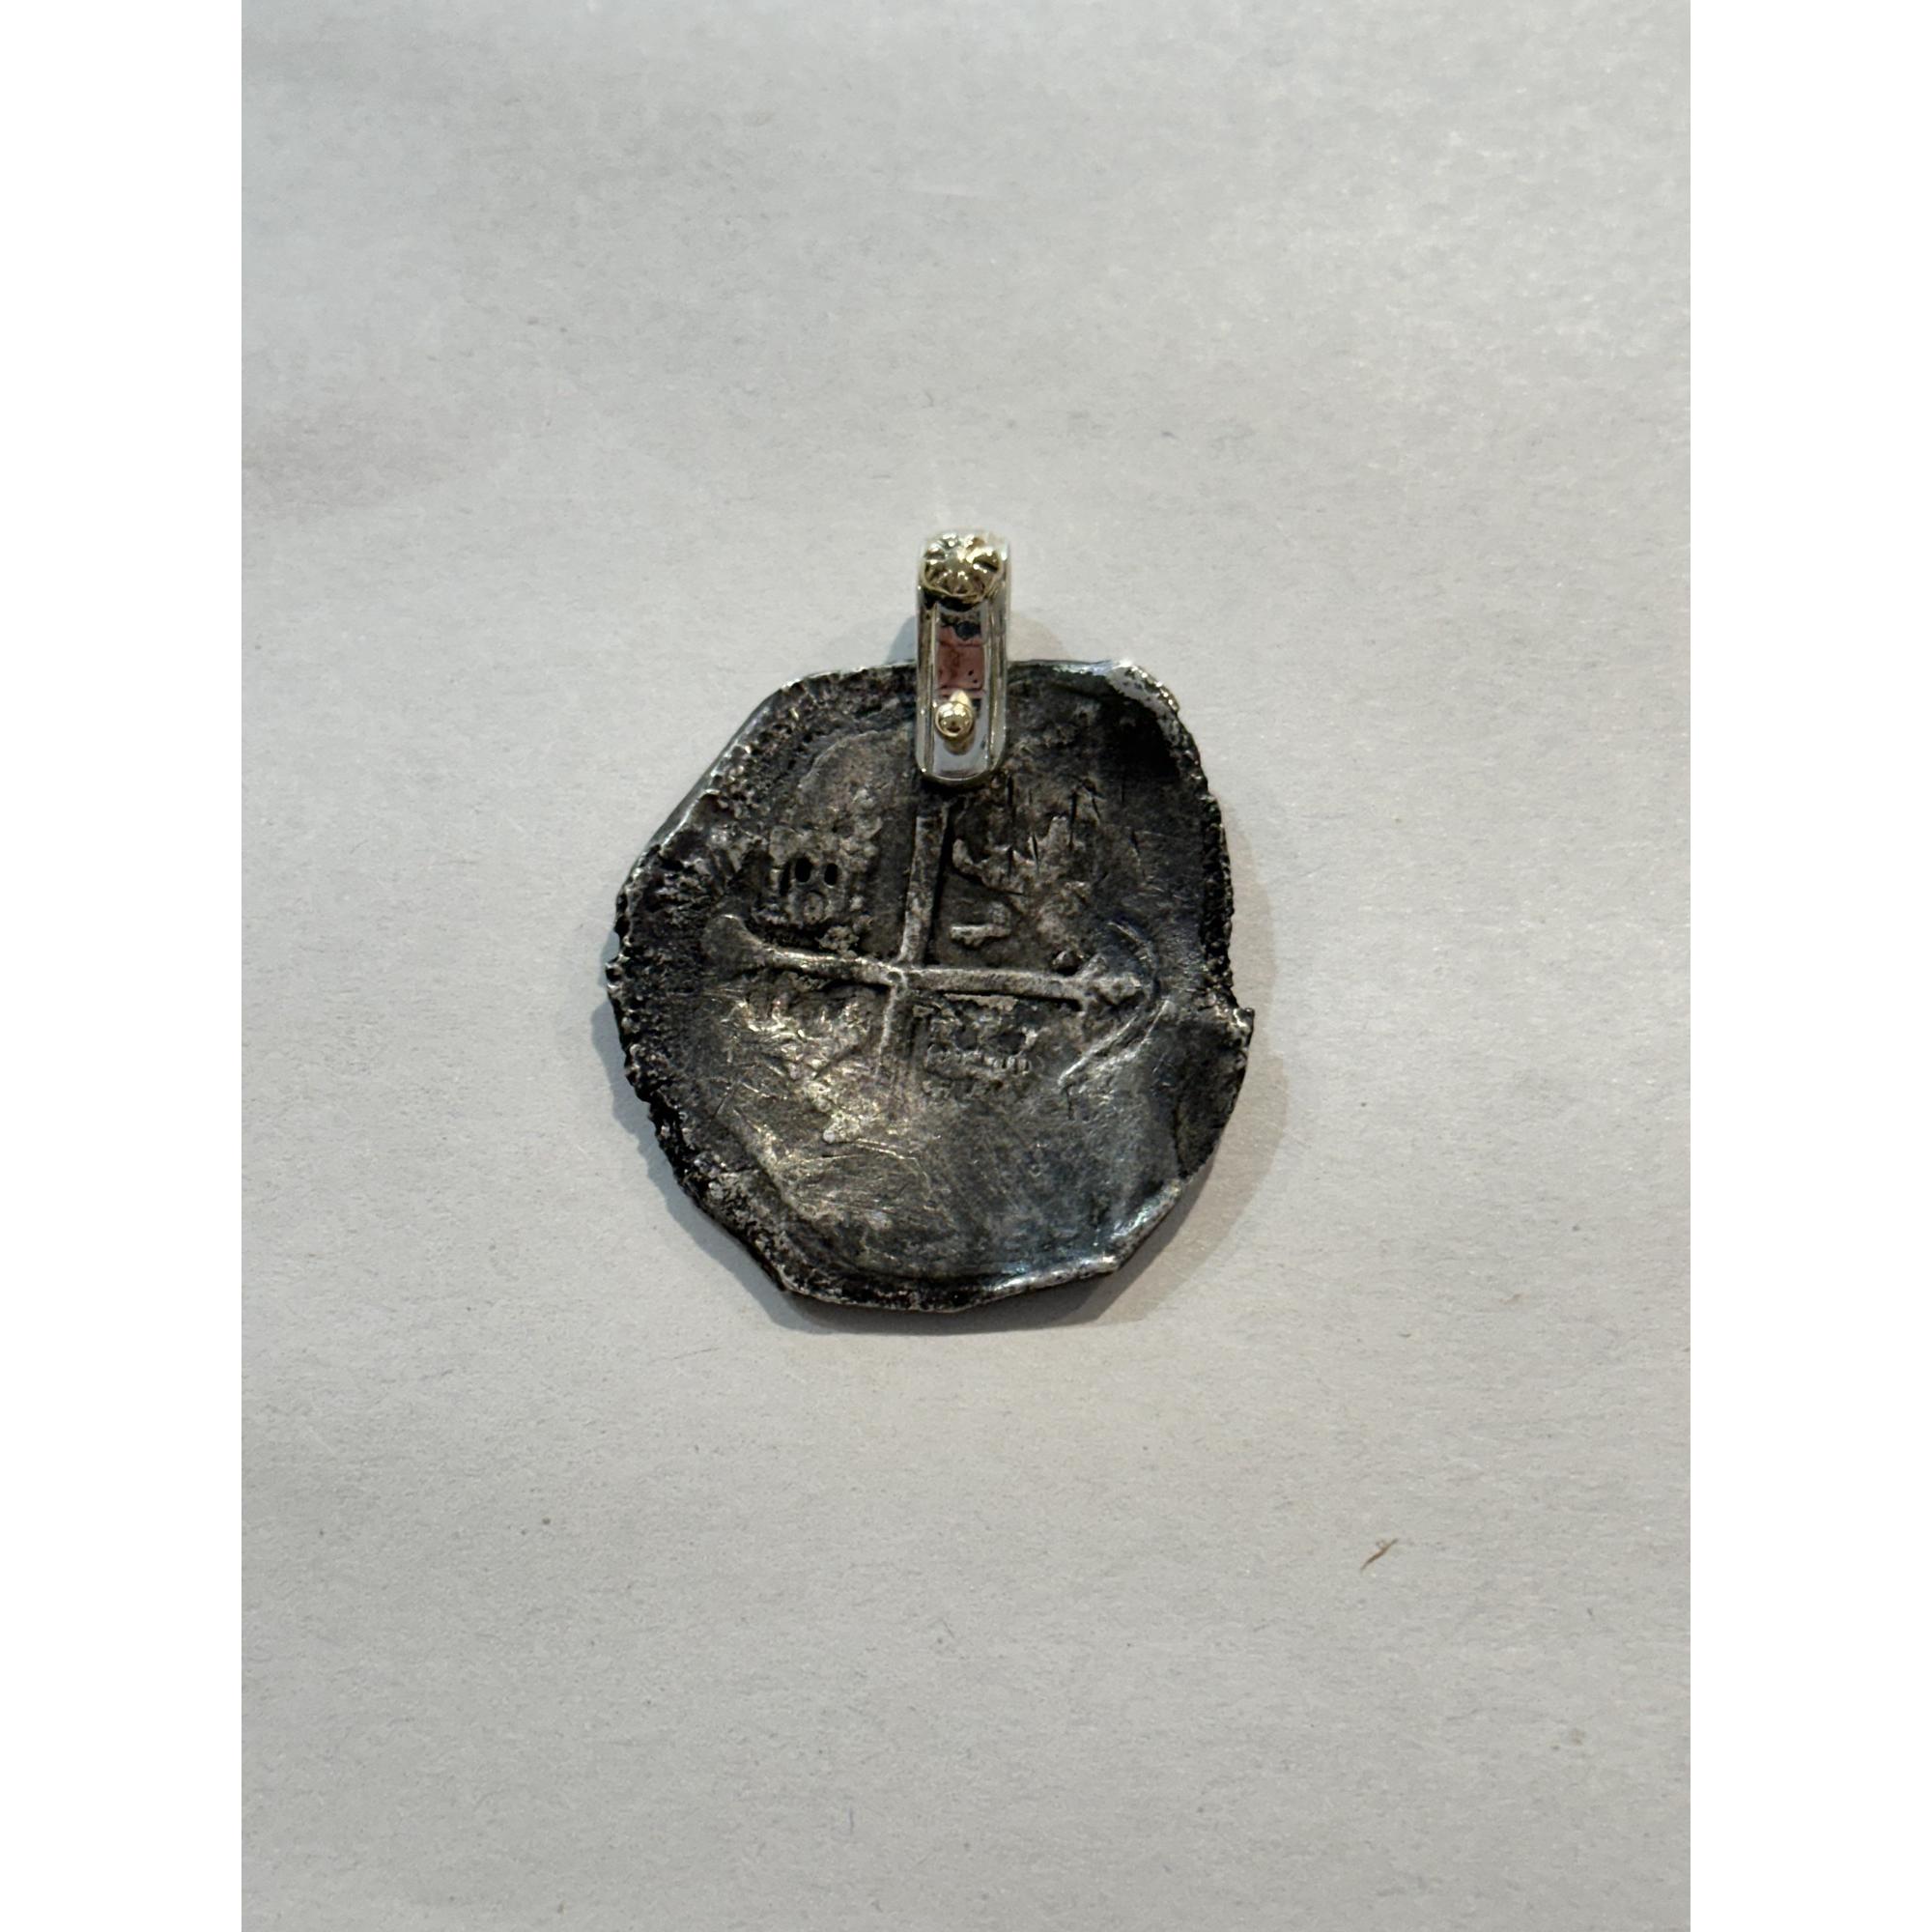 shipwreck coin with a sterling silver and 14k gold bail. 8 reale silver coin from site #212, early 1600s